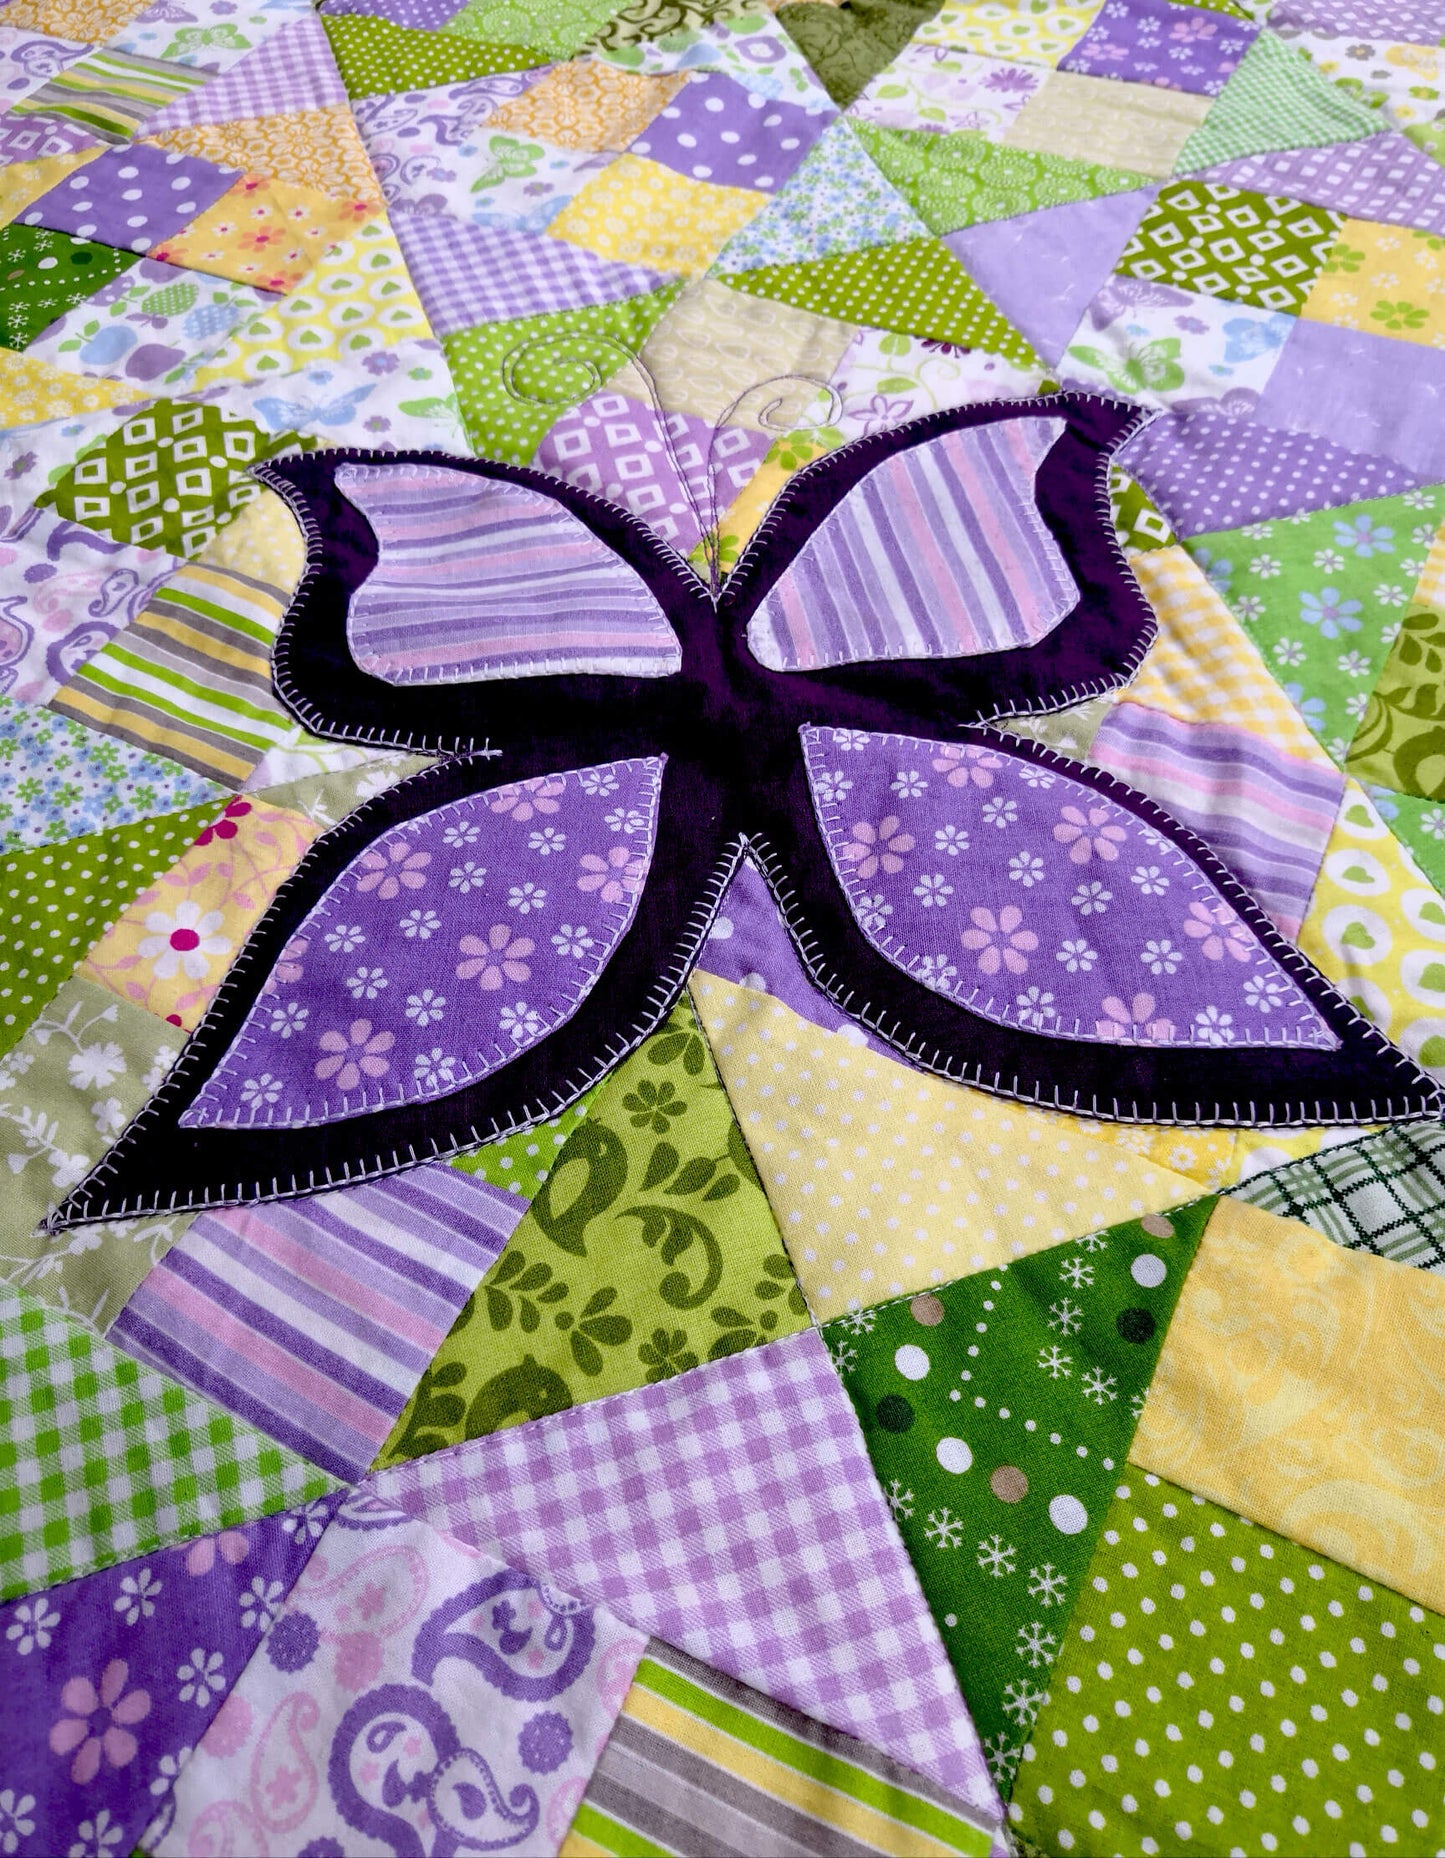 :Large butterfly appliqued on the patchworkwork